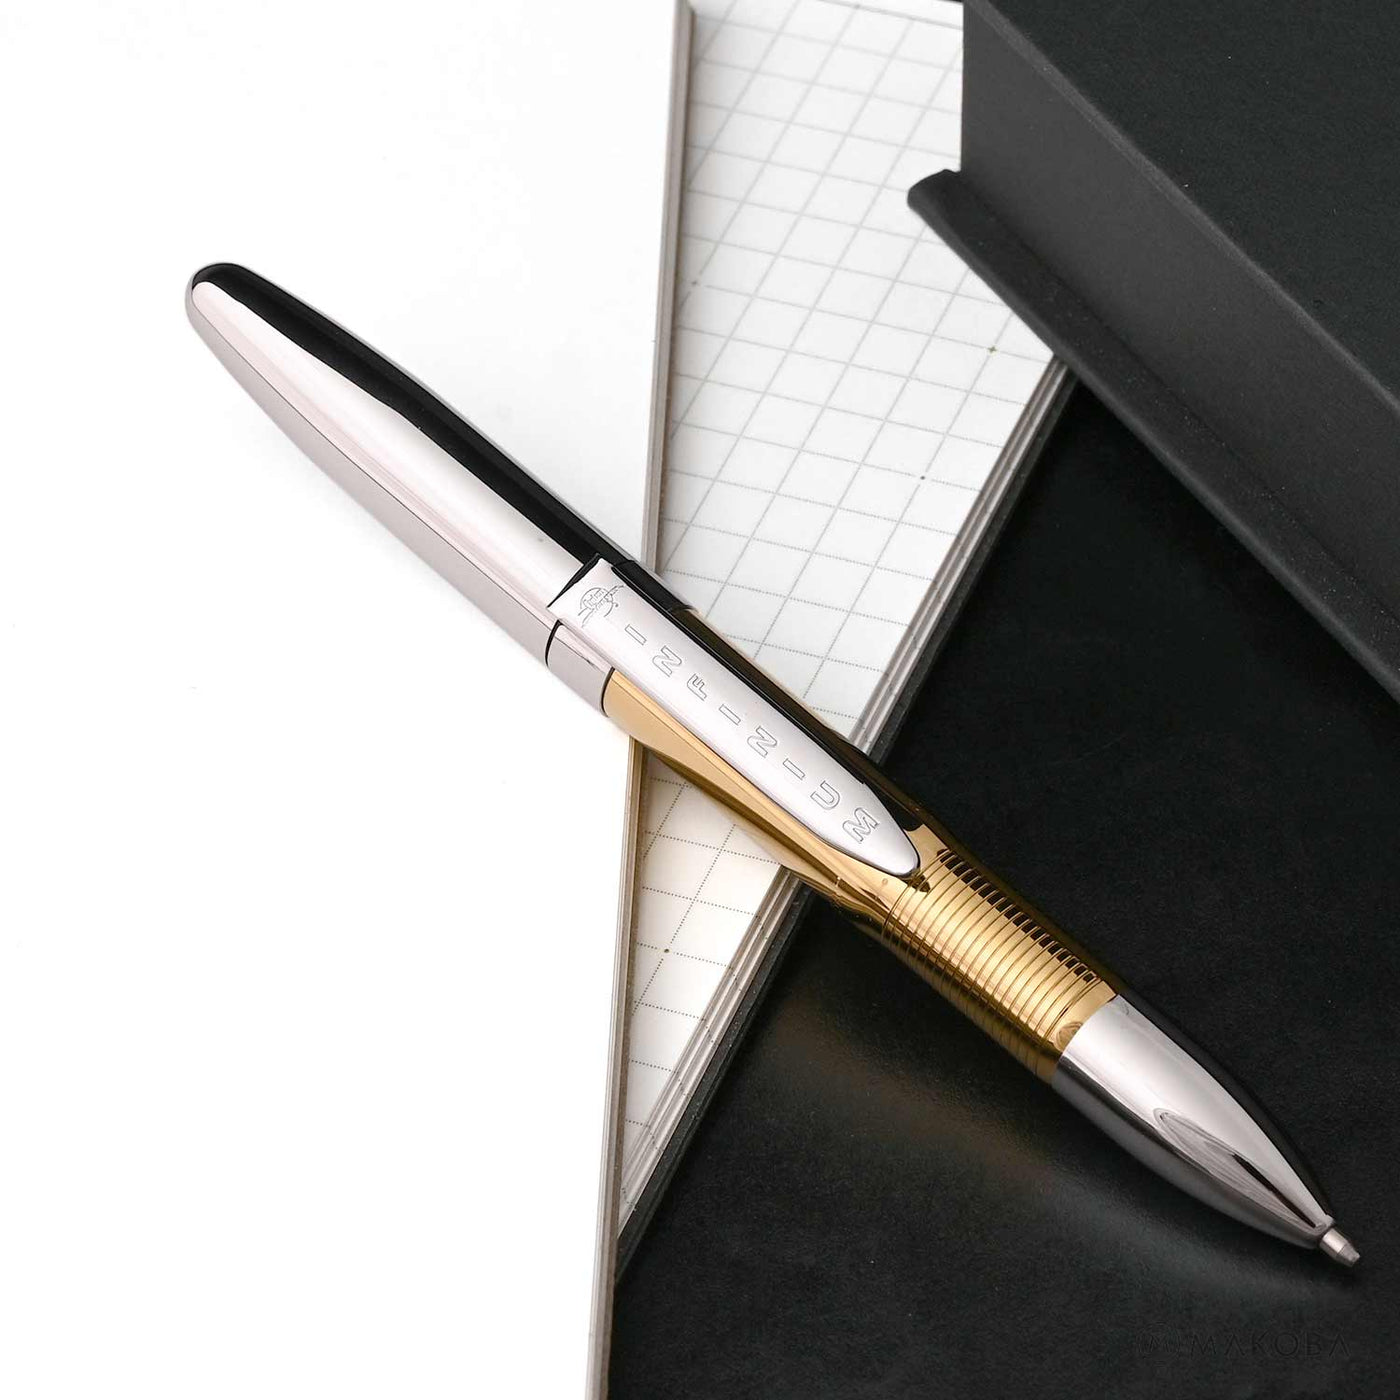 Fisher Space Infinium Ball Pen, Gold Titanium Chrome ( Blue Ink) - Guaranteed To Write For A Lifetime